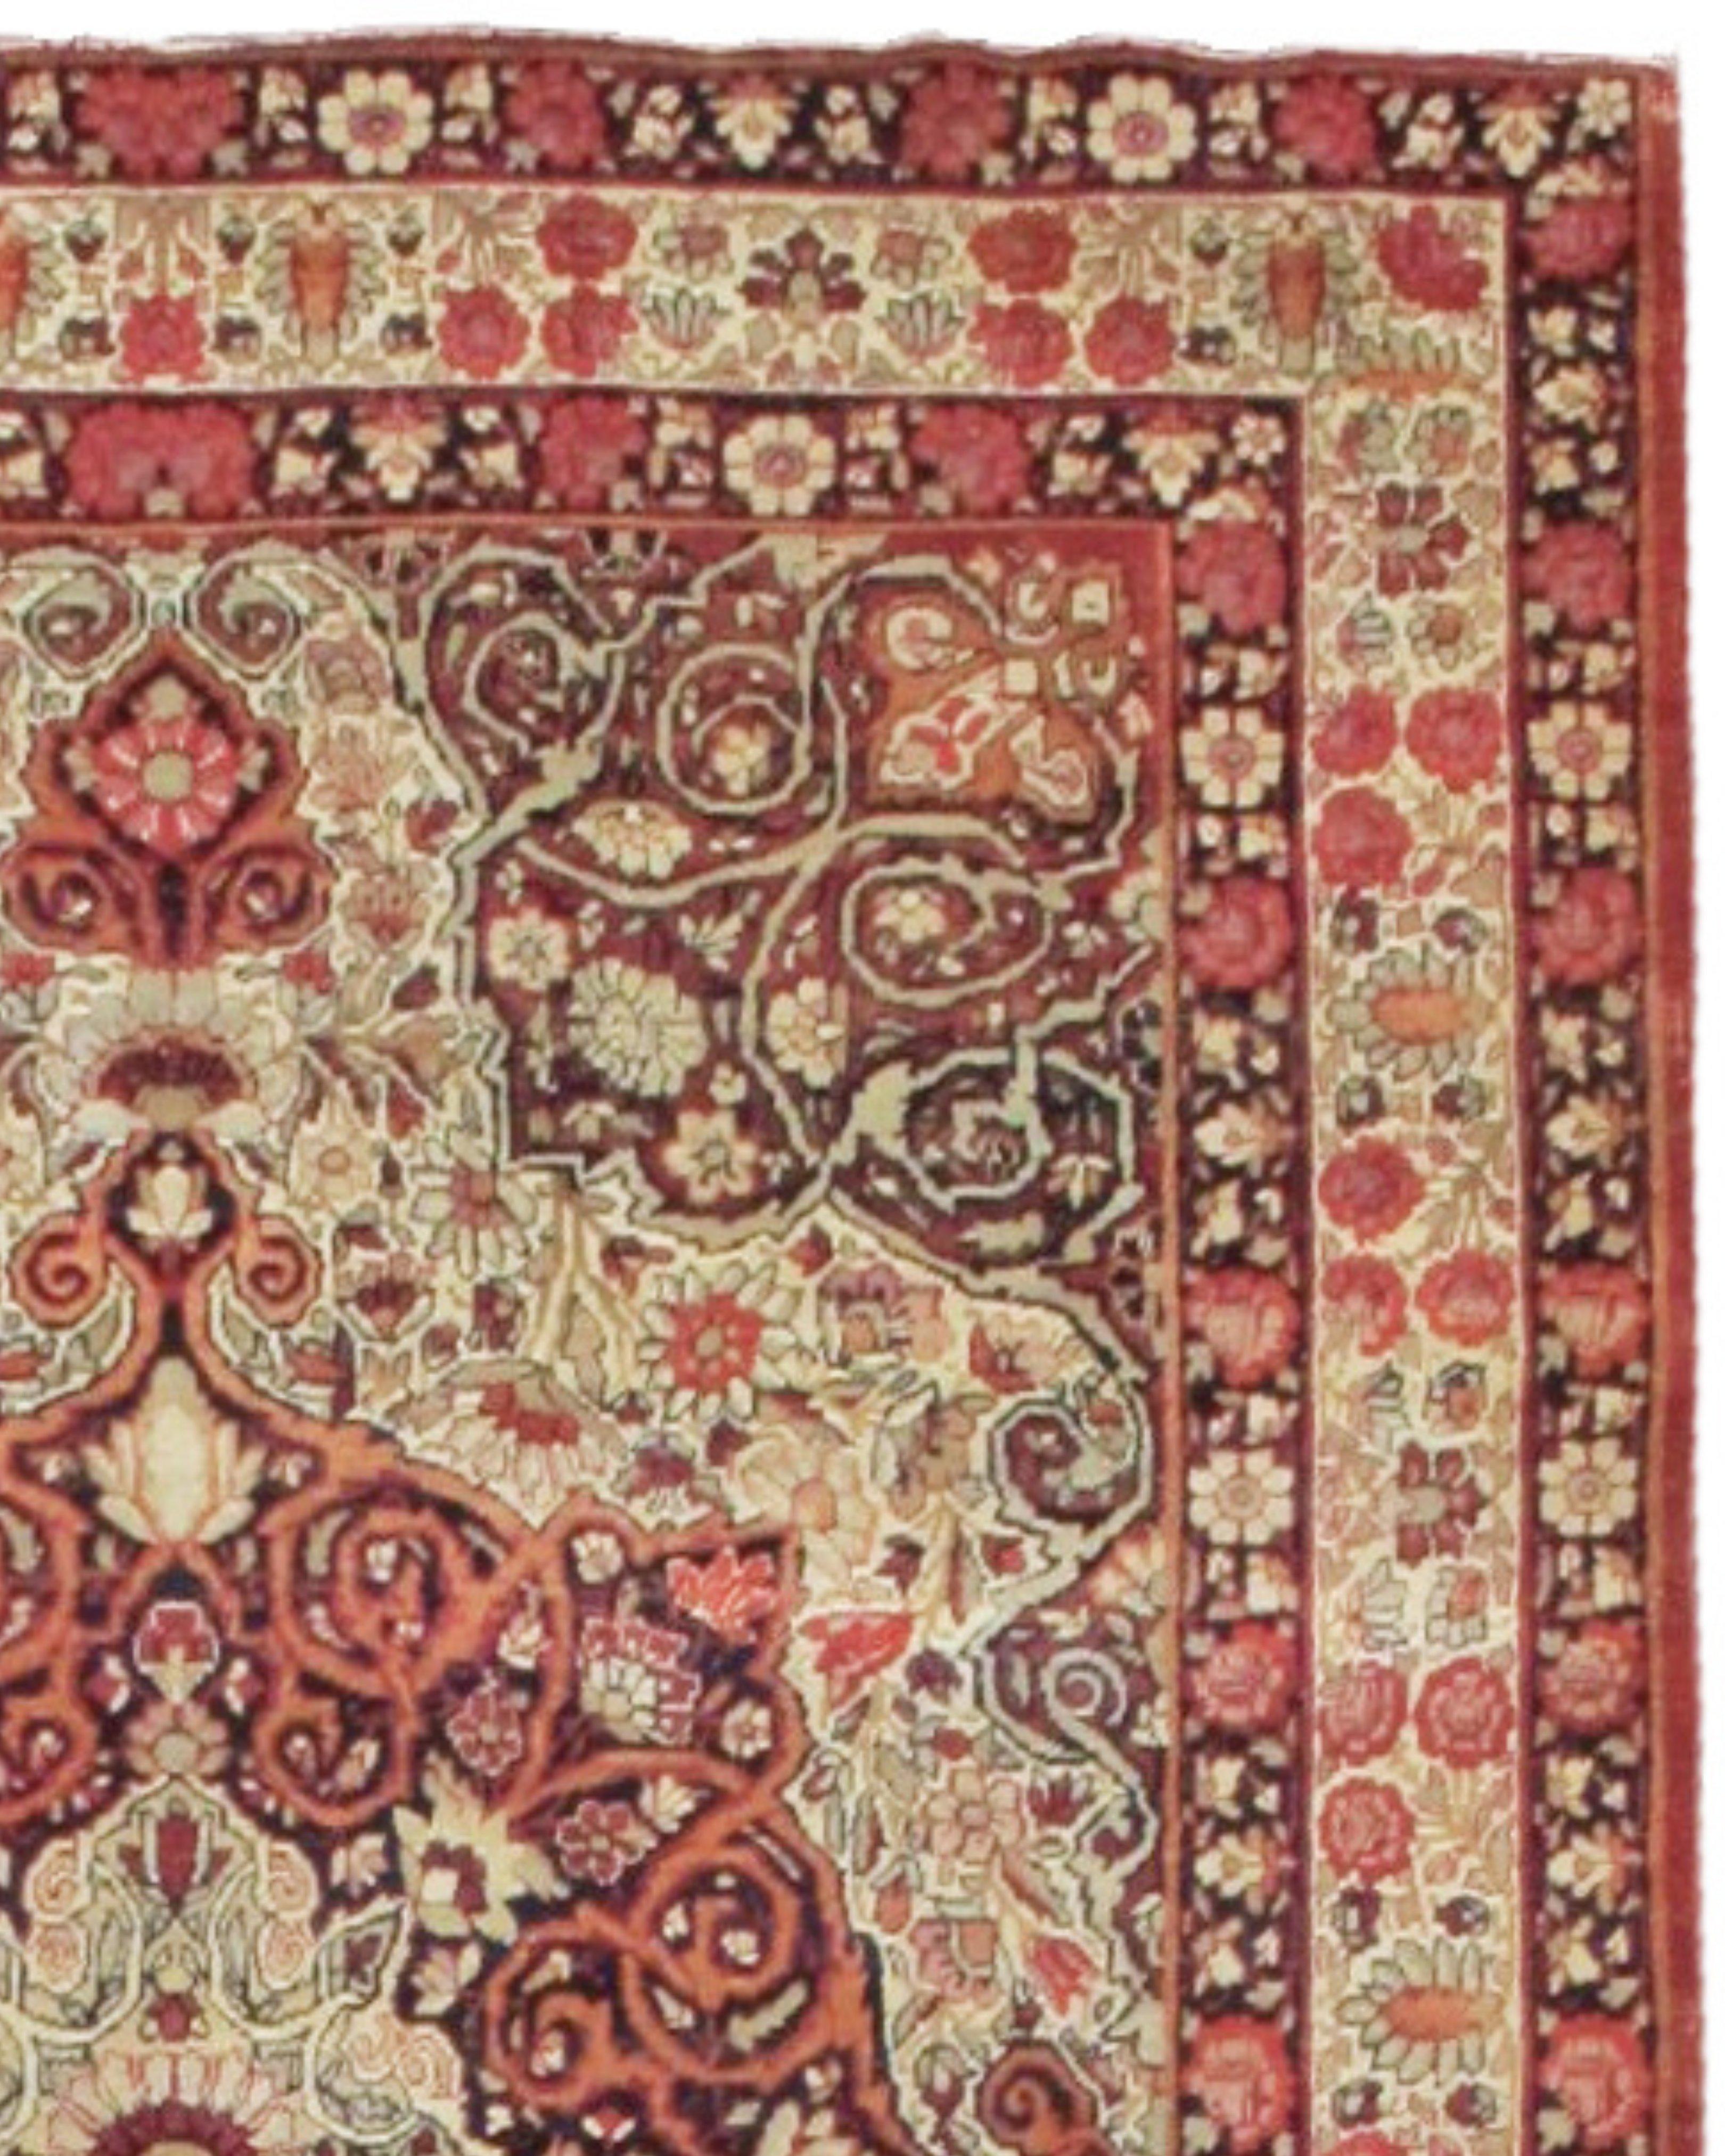 Antique Persian Kirman Rug, c. 1900

Additional Information:
Dimensions: 4'5